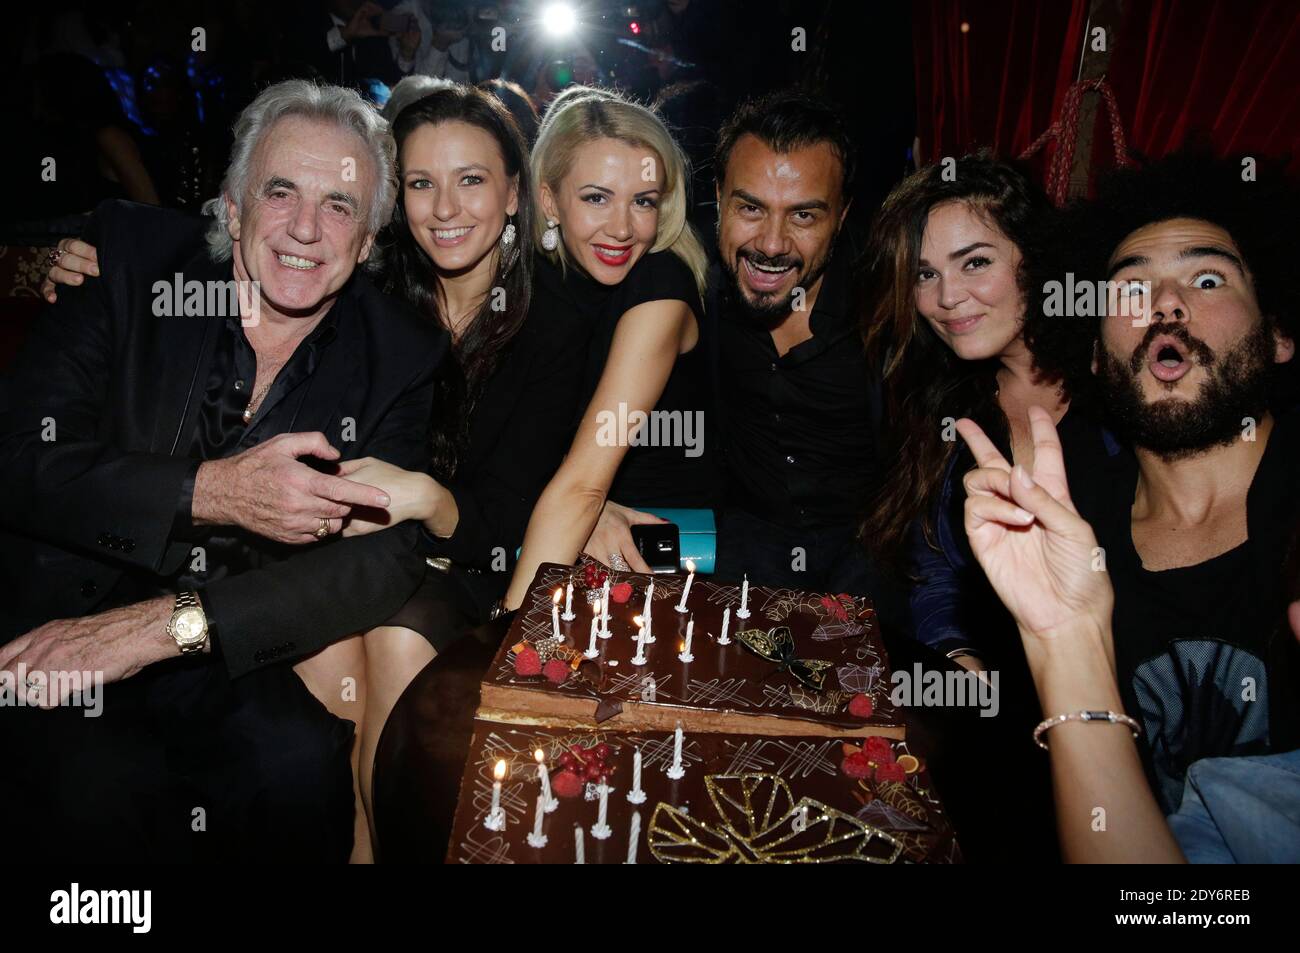 Muratt Atik, Joanna Atik, Peter Stringfellow and his wife, Lola Dewaere and Alexandre Le Strat attending the New 'Stringfellows' Opening party and Muratt Atik's Birthday, in Paris, France on November 27, 2014. Photo by Jerome Domine ABACAPRESS.COM Stock Photo